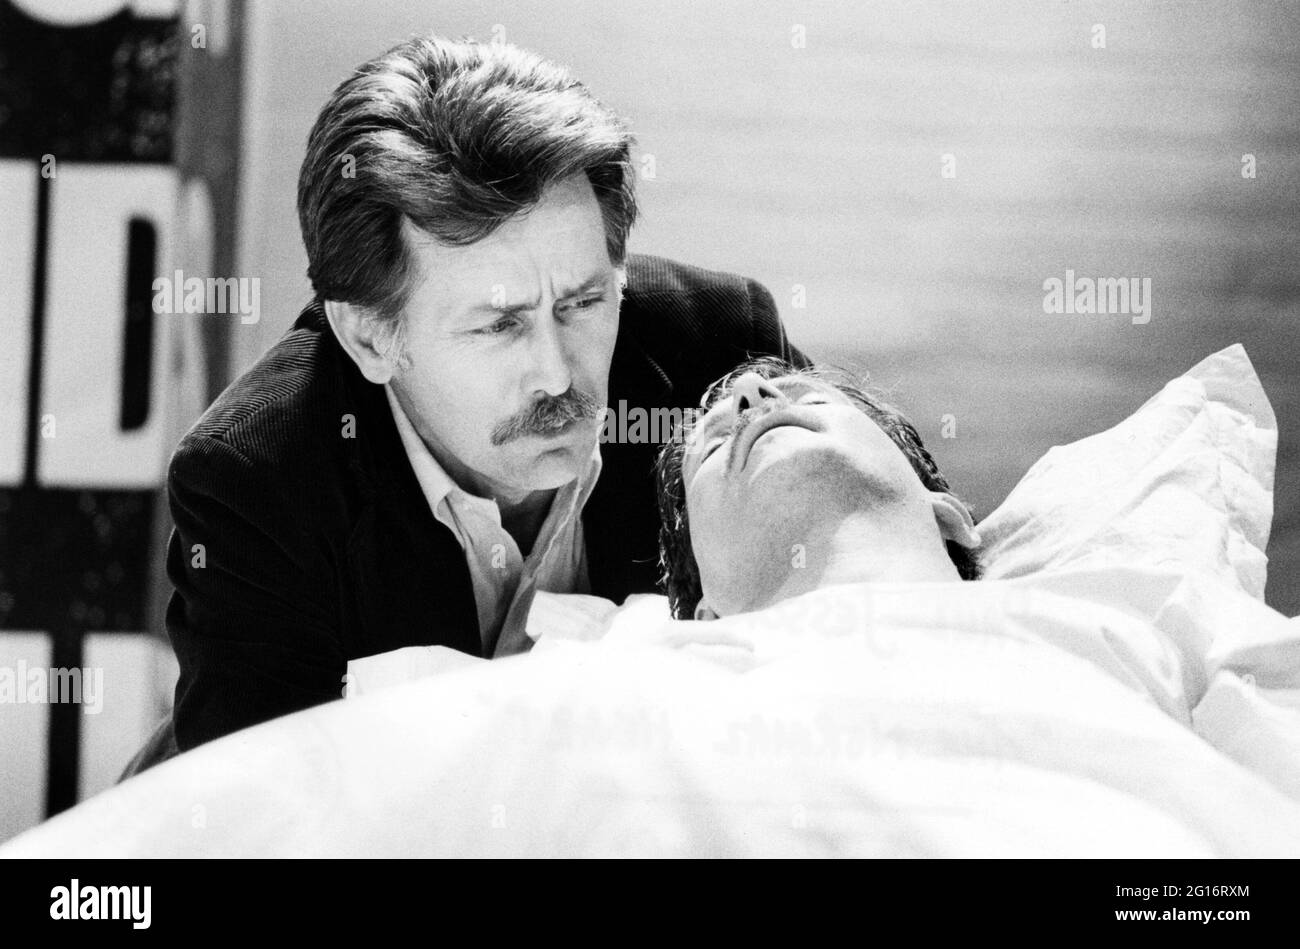 Martin Sheen (Ned Weeks) with Paul Jesson (Felix Turner) in THE NORMAL HEART by Larry Kramer at the Royal Court Theatre, London SW1 20/03/1986  design: Geoff Rose  lighting: Gerry Jenkinson  director: David Hayman Stock Photo